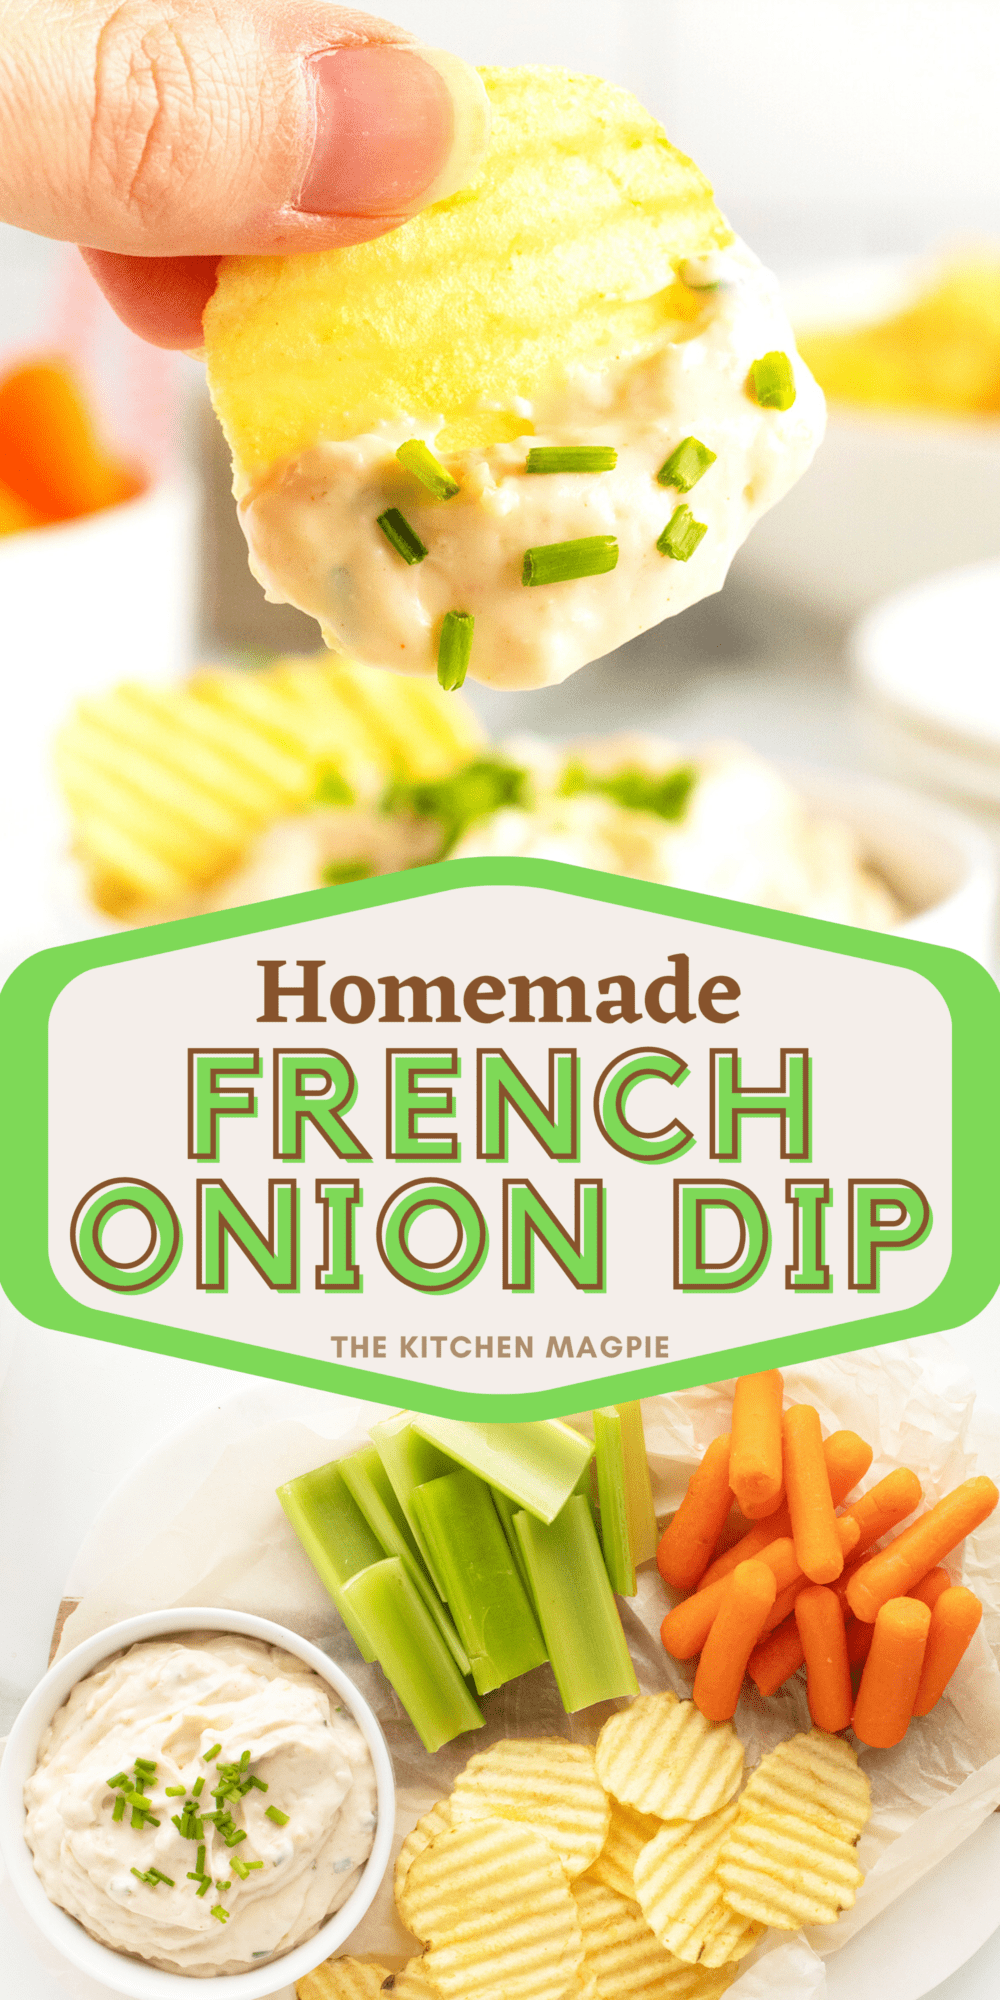 This delicious French onion dip is made from scratch with your own homemade dry onion soup mix! The perfect vegetable and chip dip for parties! 